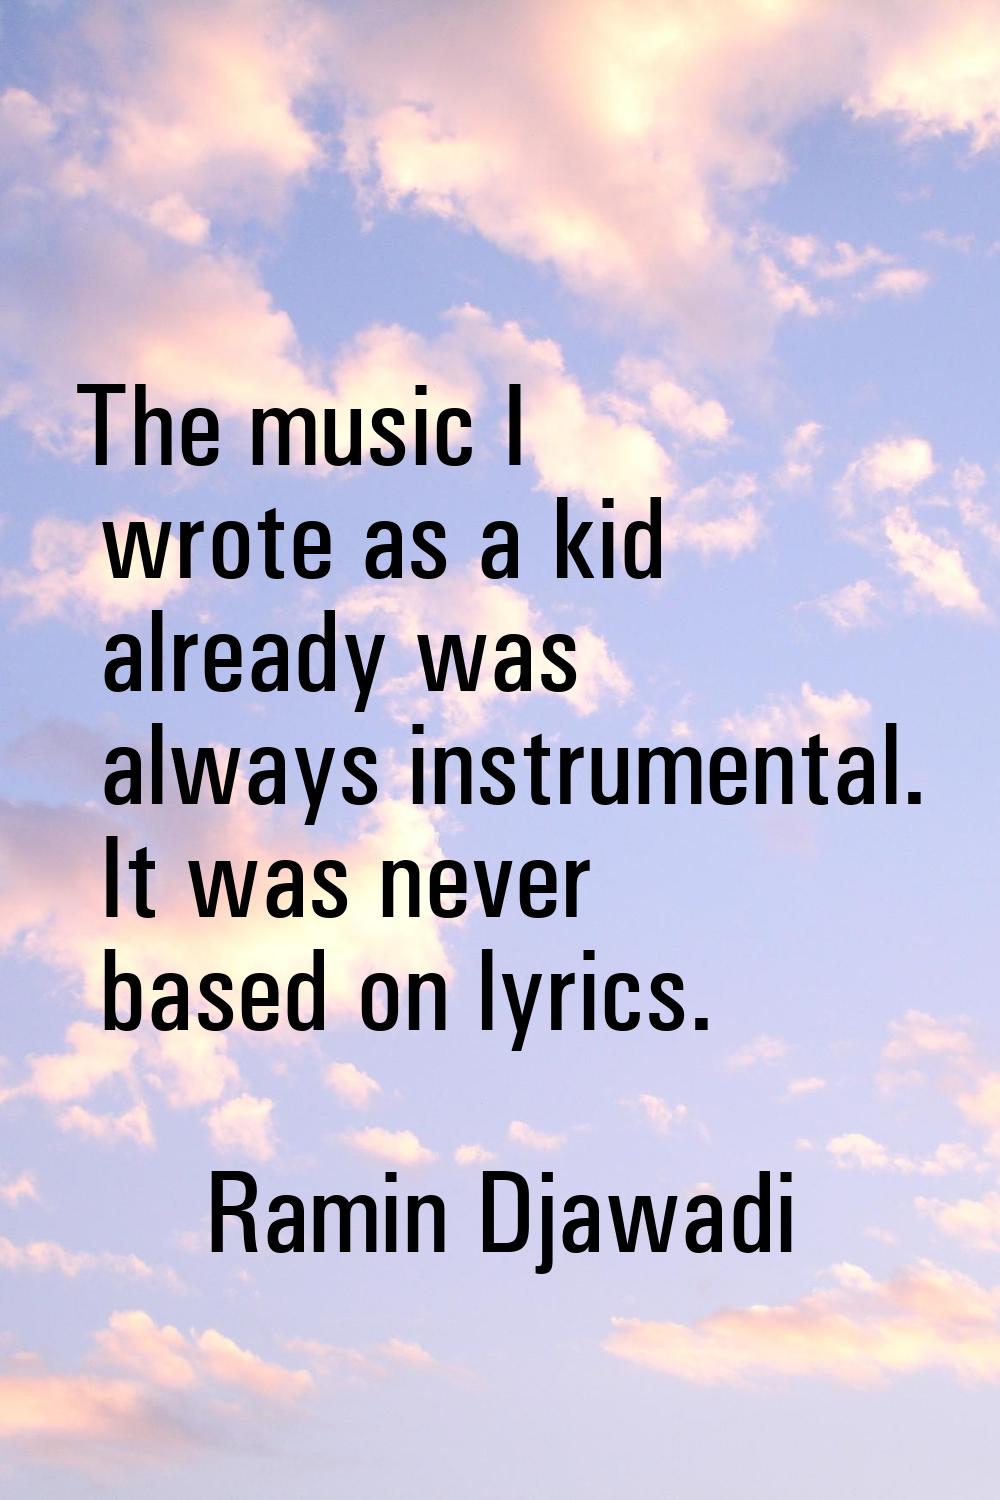 The music I wrote as a kid already was always instrumental. It was never based on lyrics.